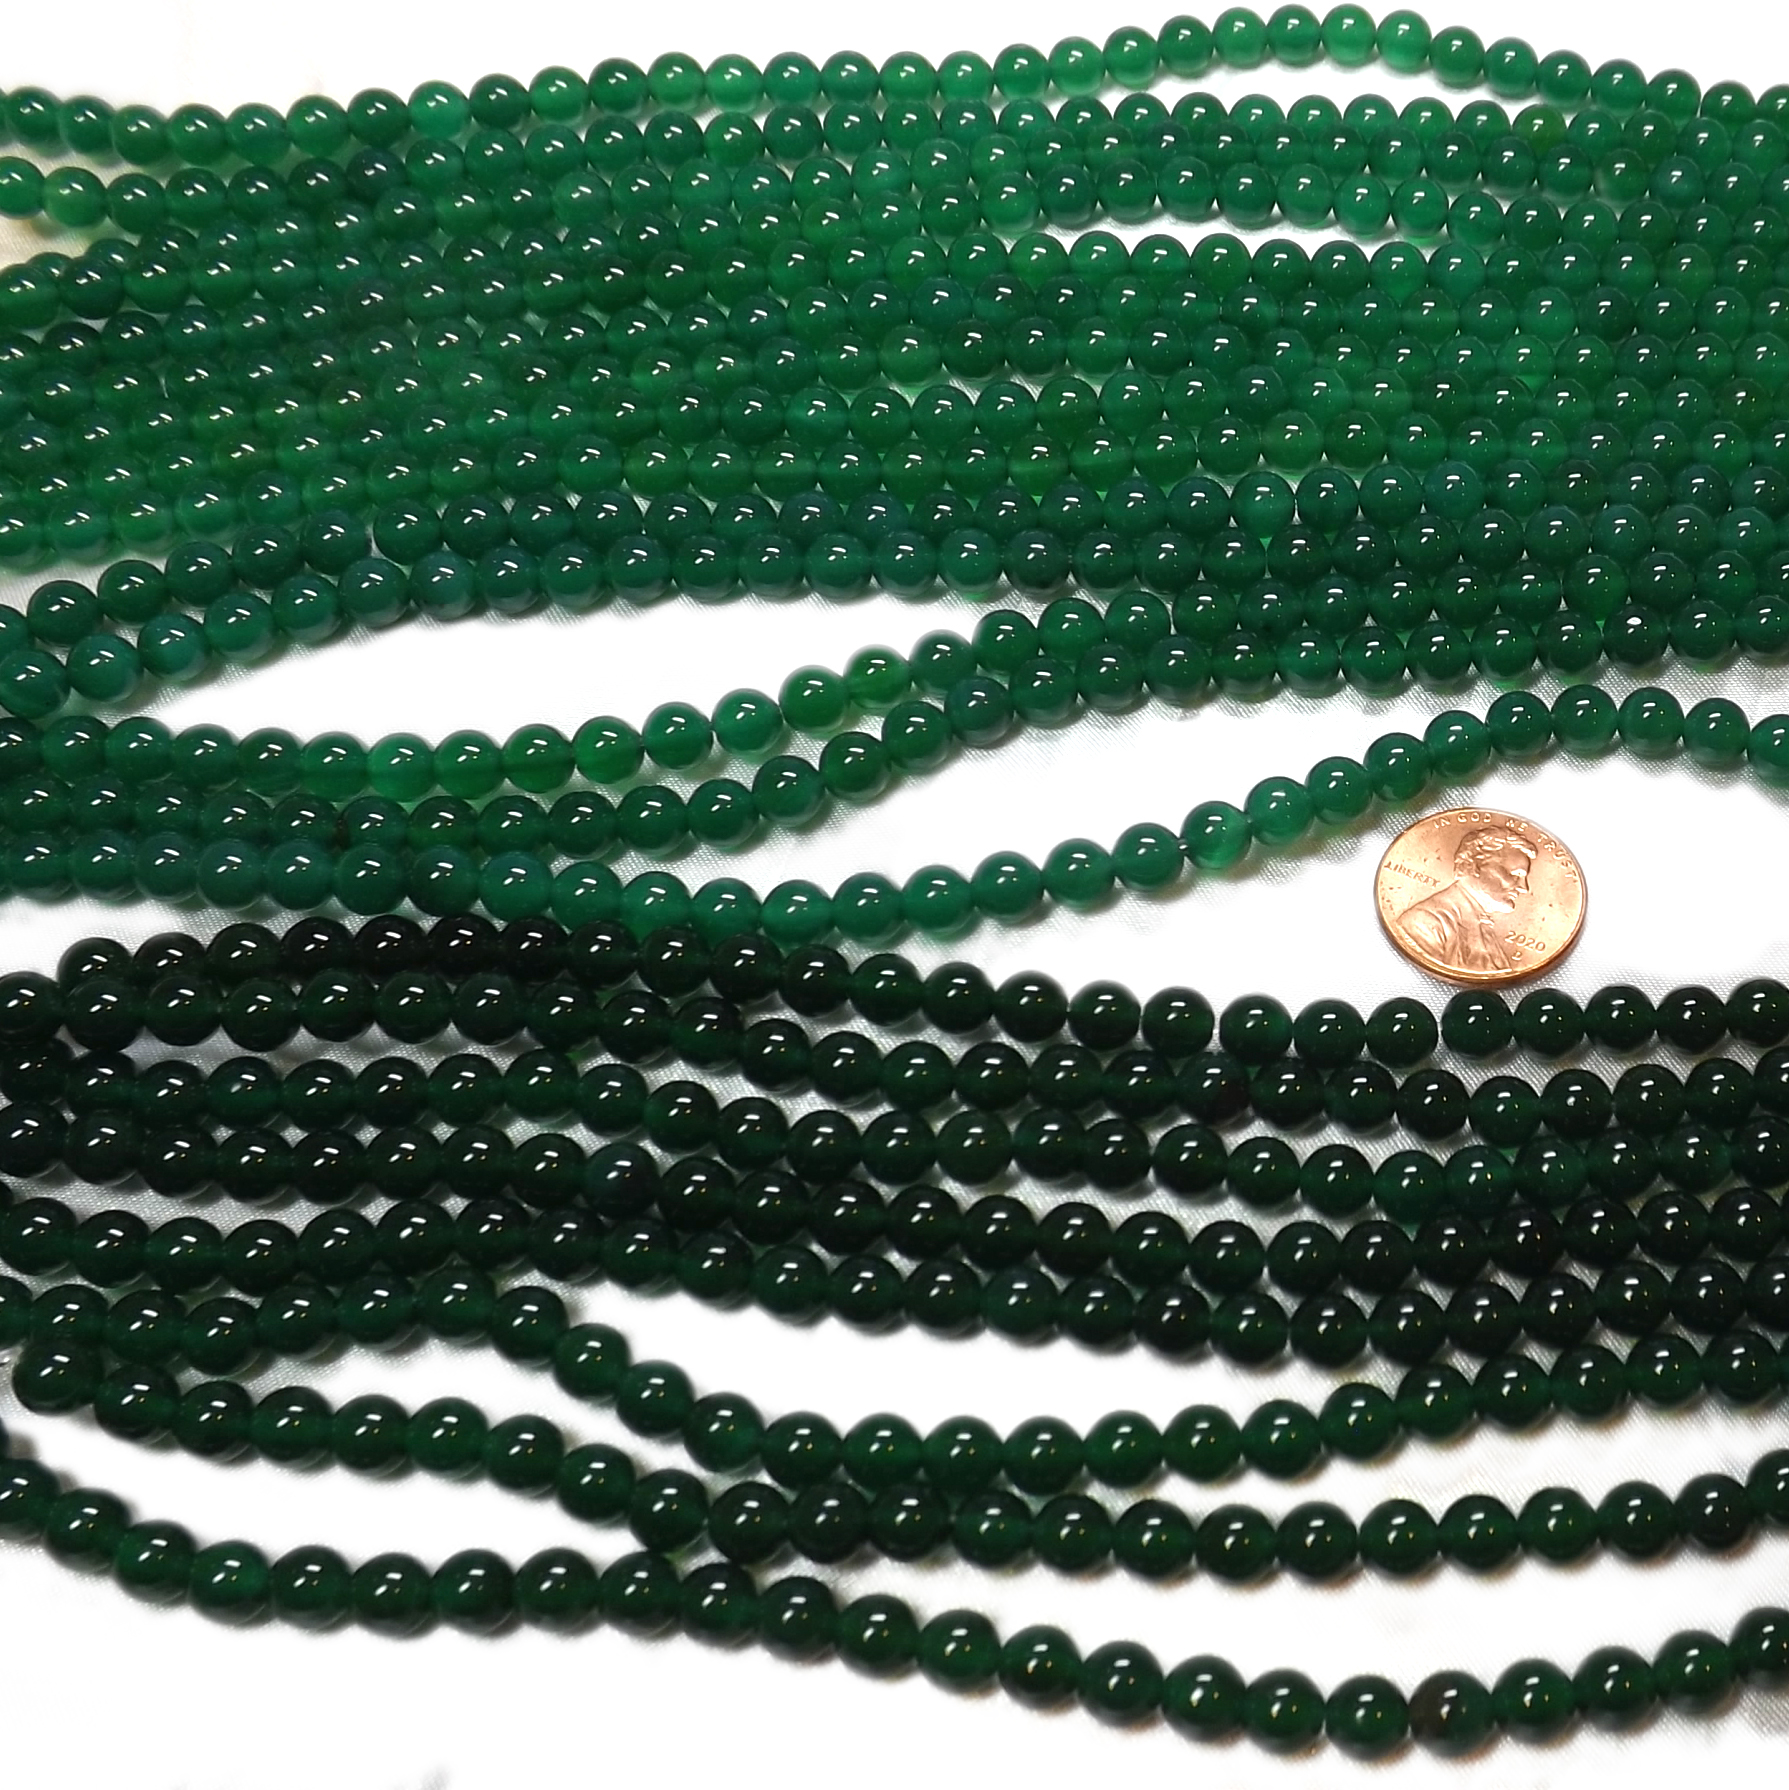 6mm Round Green or Dark Green Jade Beads on a Temporary String